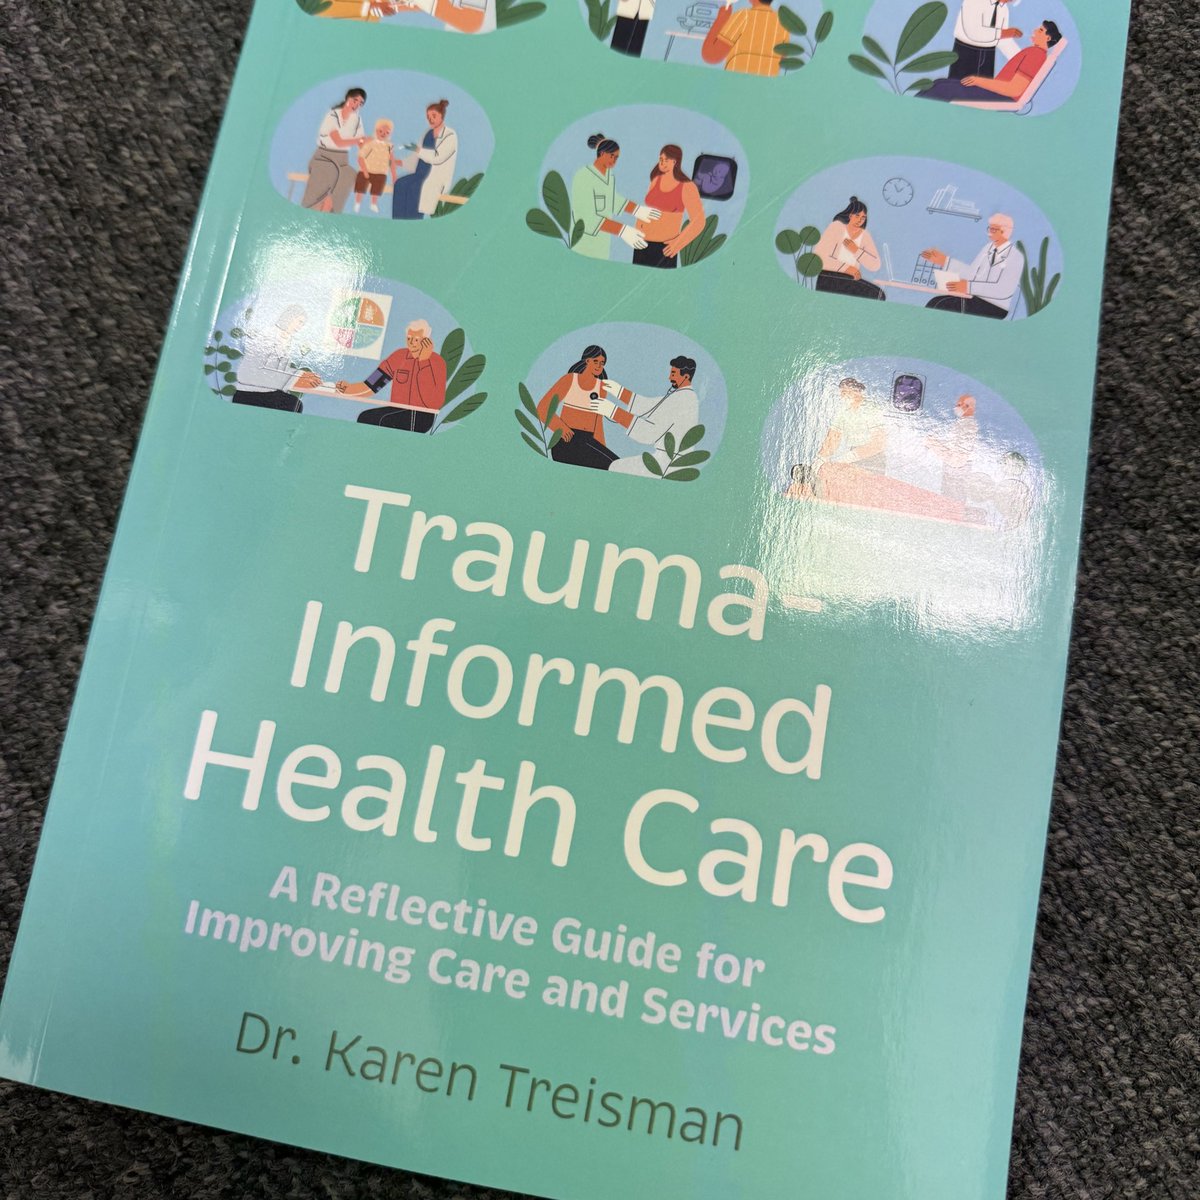 Thanks to whoever sent this to us, extremely grateful and a timely resource to add to our collection… we know @NDodzro has recommended this! #TraumaInformedHealthCare